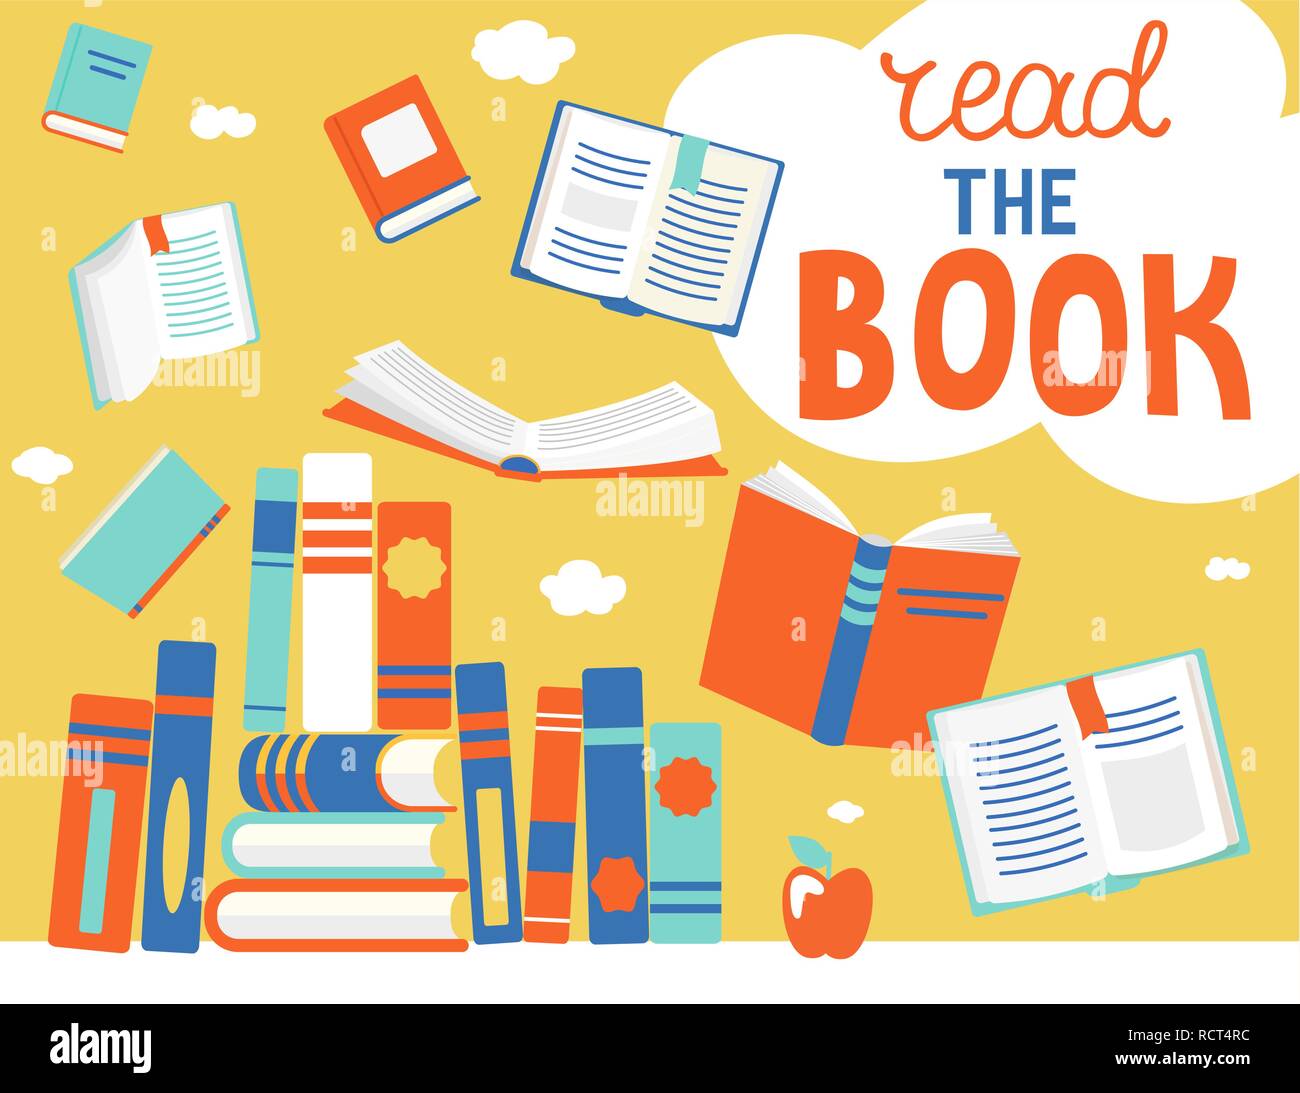 Close and open books in different positions with bubble read the book. Knowledge, learning, education, relax and enjoy concept design. Vector illustration in flat style. Stock Vector